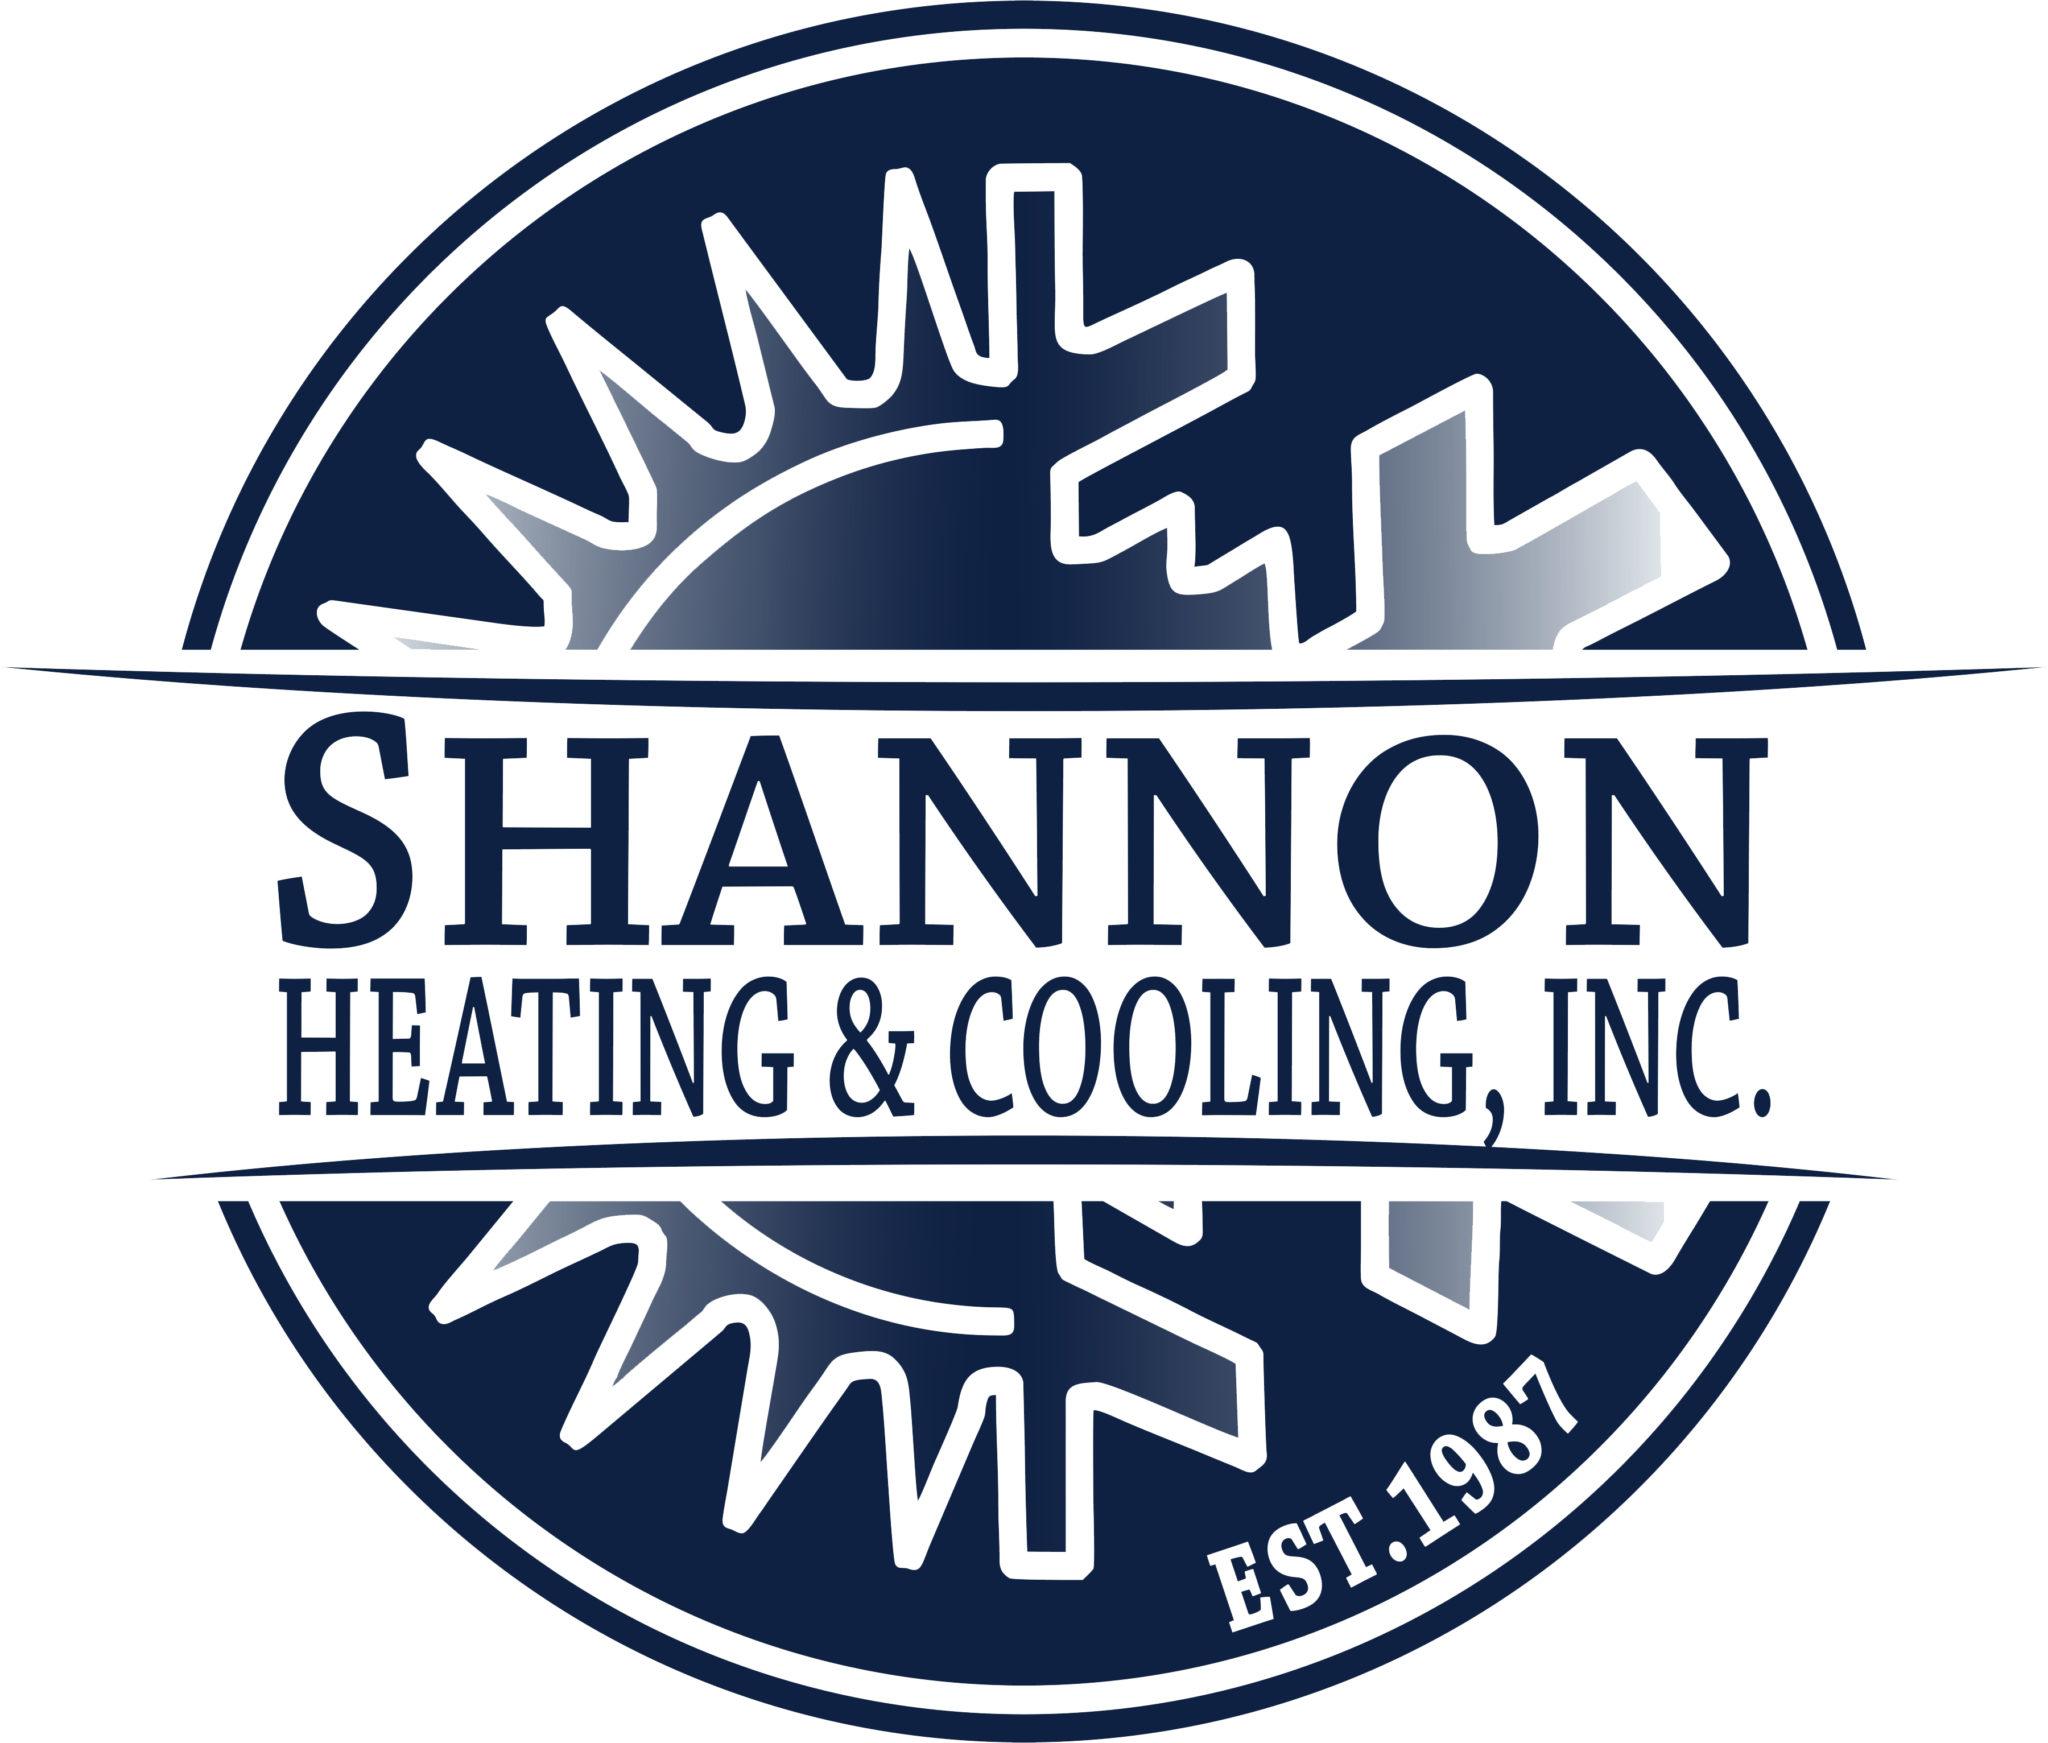 Shannon Logo - Shannon Heating and Cooling Home - Shannon Heating and Cooling